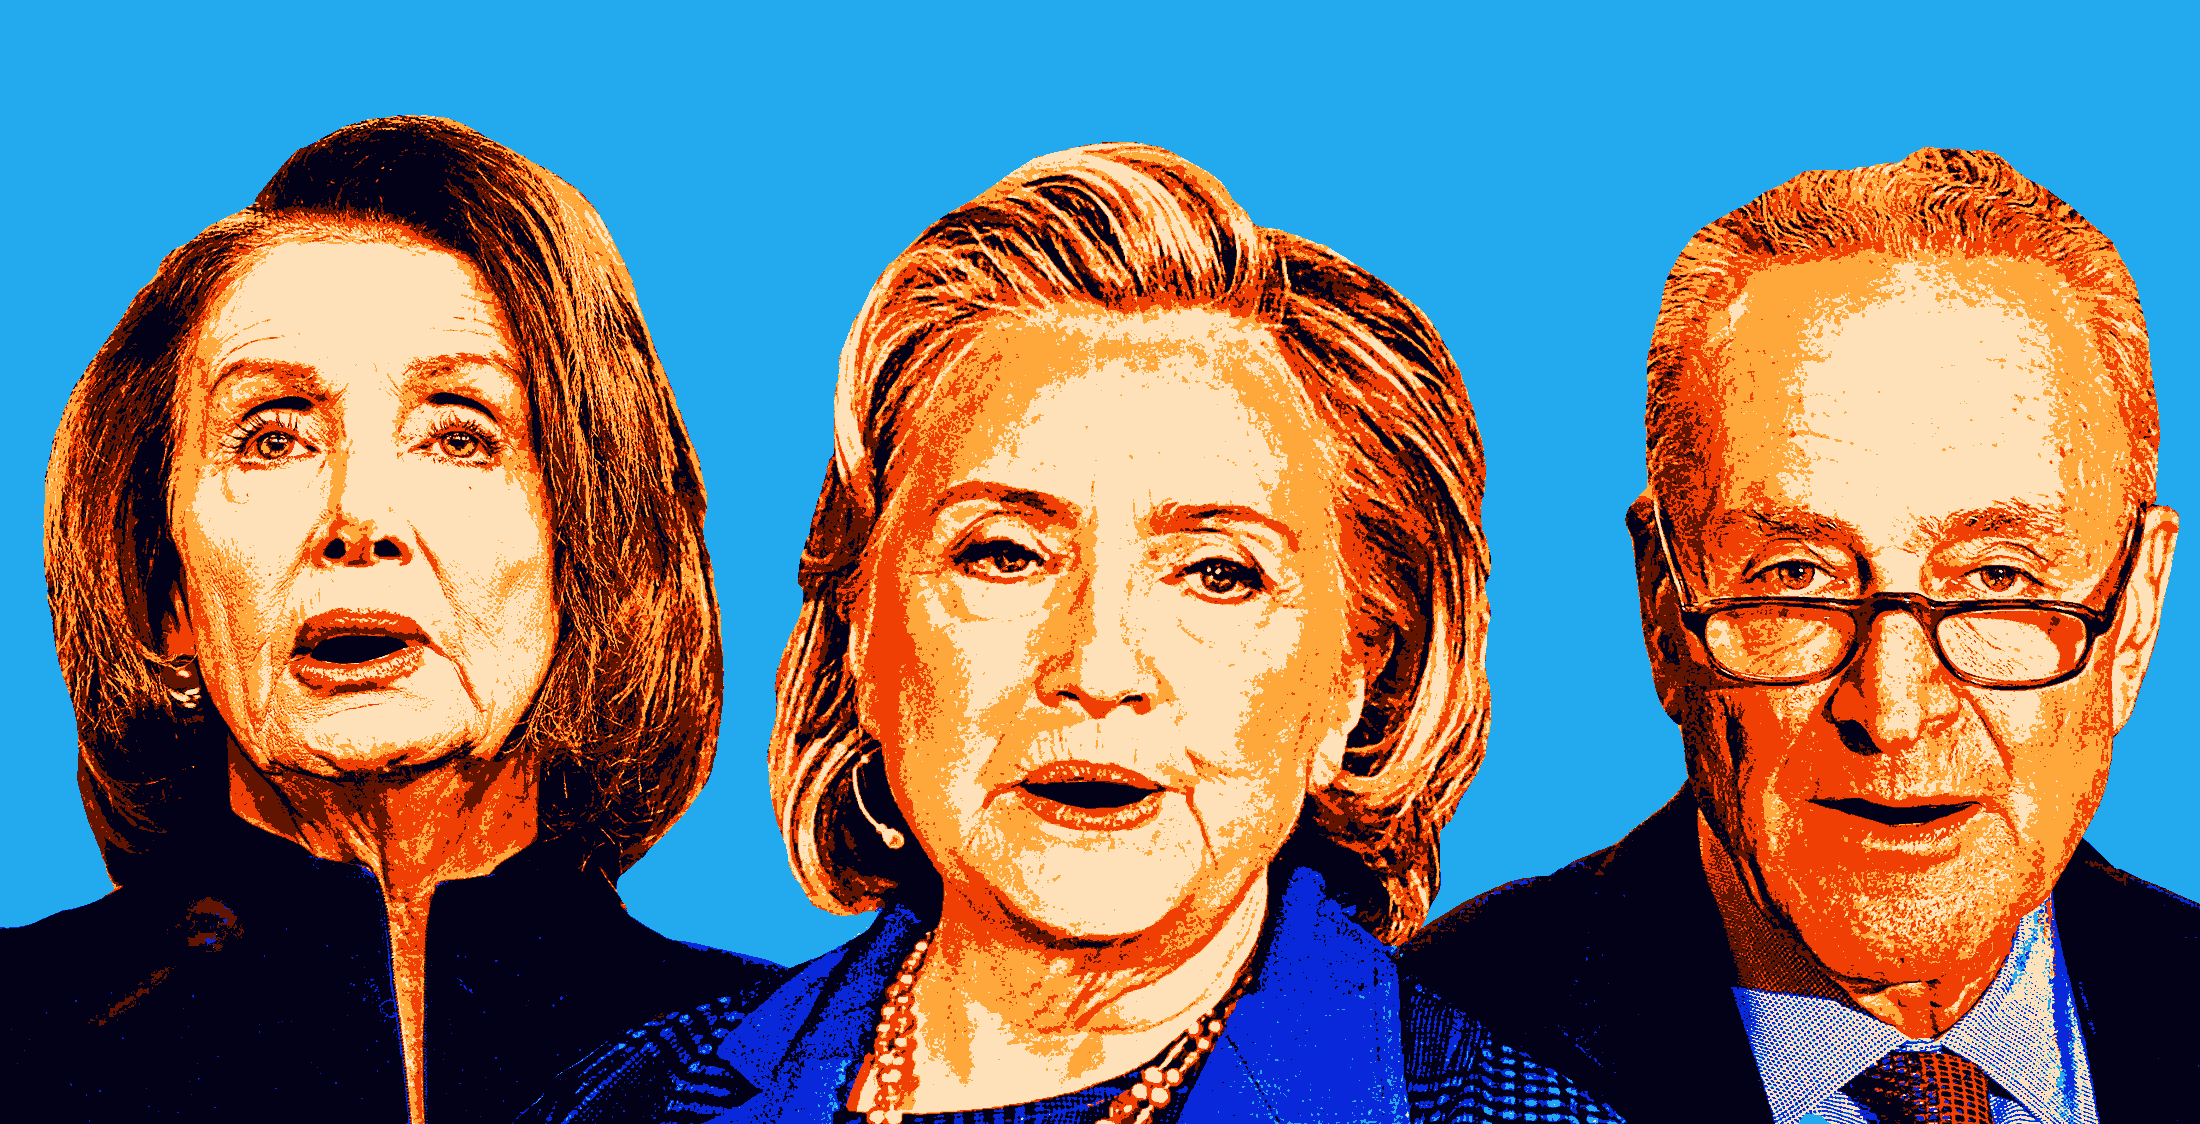 GIF of stylized images of Nancy Pelosi, Hillary Clinton, and Chuck Schumer with their jaws moving like they are talking.